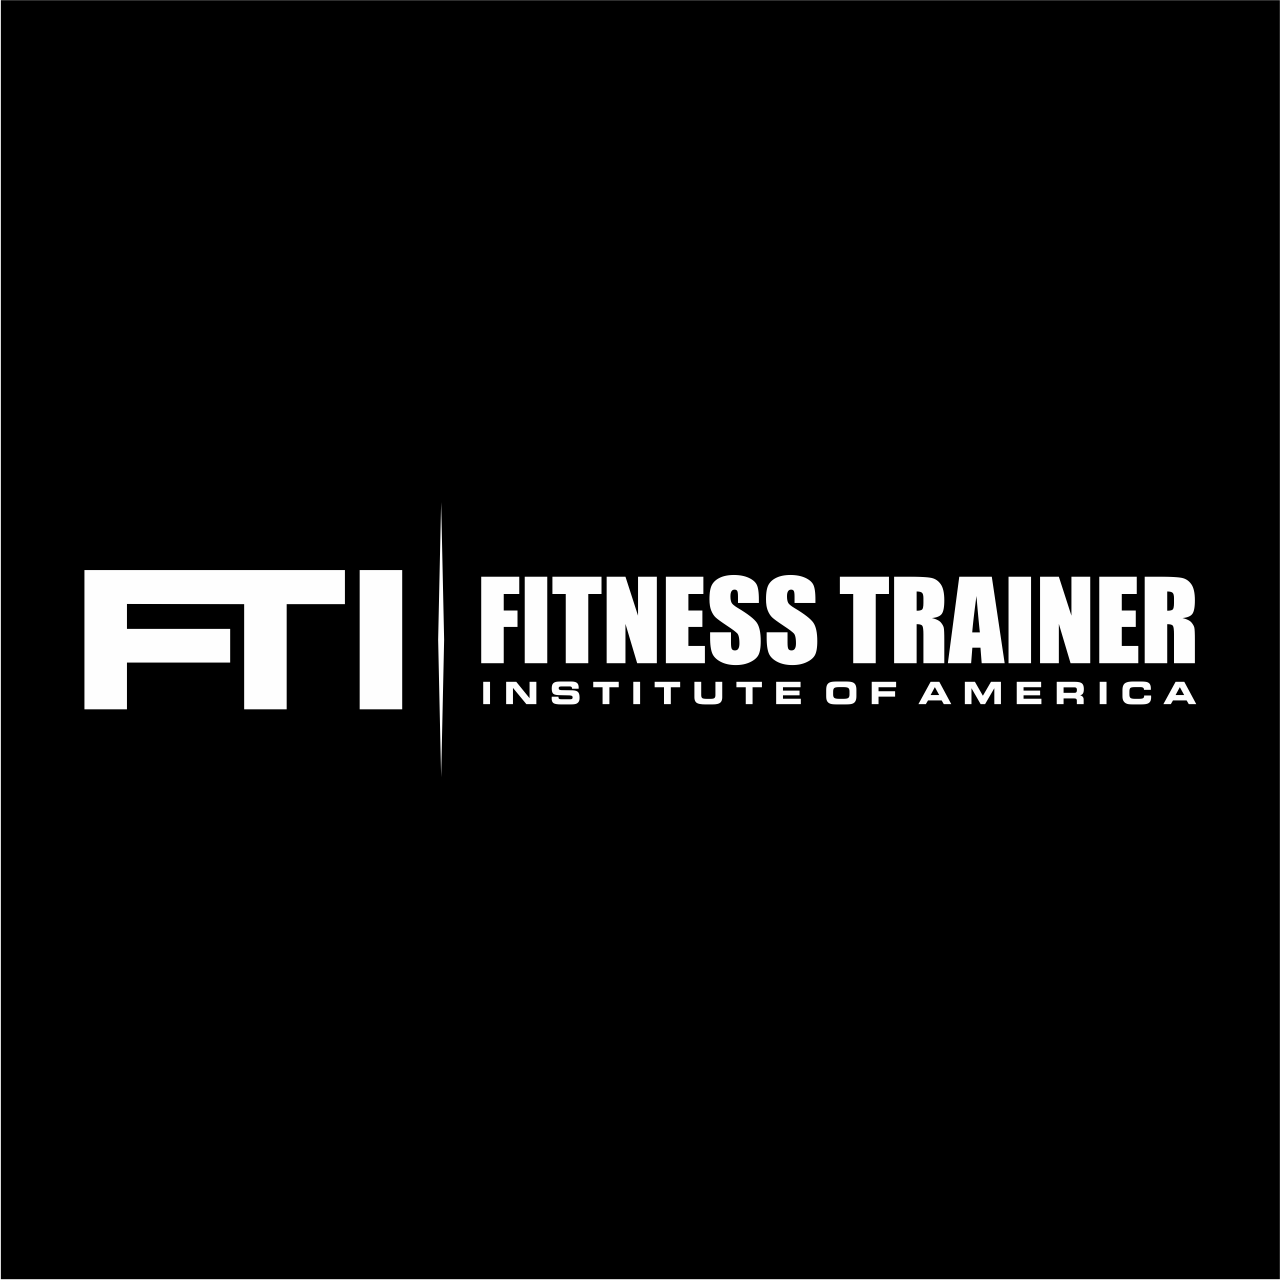 FTI is a #PersonalTrainer Certification Exam PREP and Education Course. Students will be prepared to successfully take #NASM or #ACE exam.